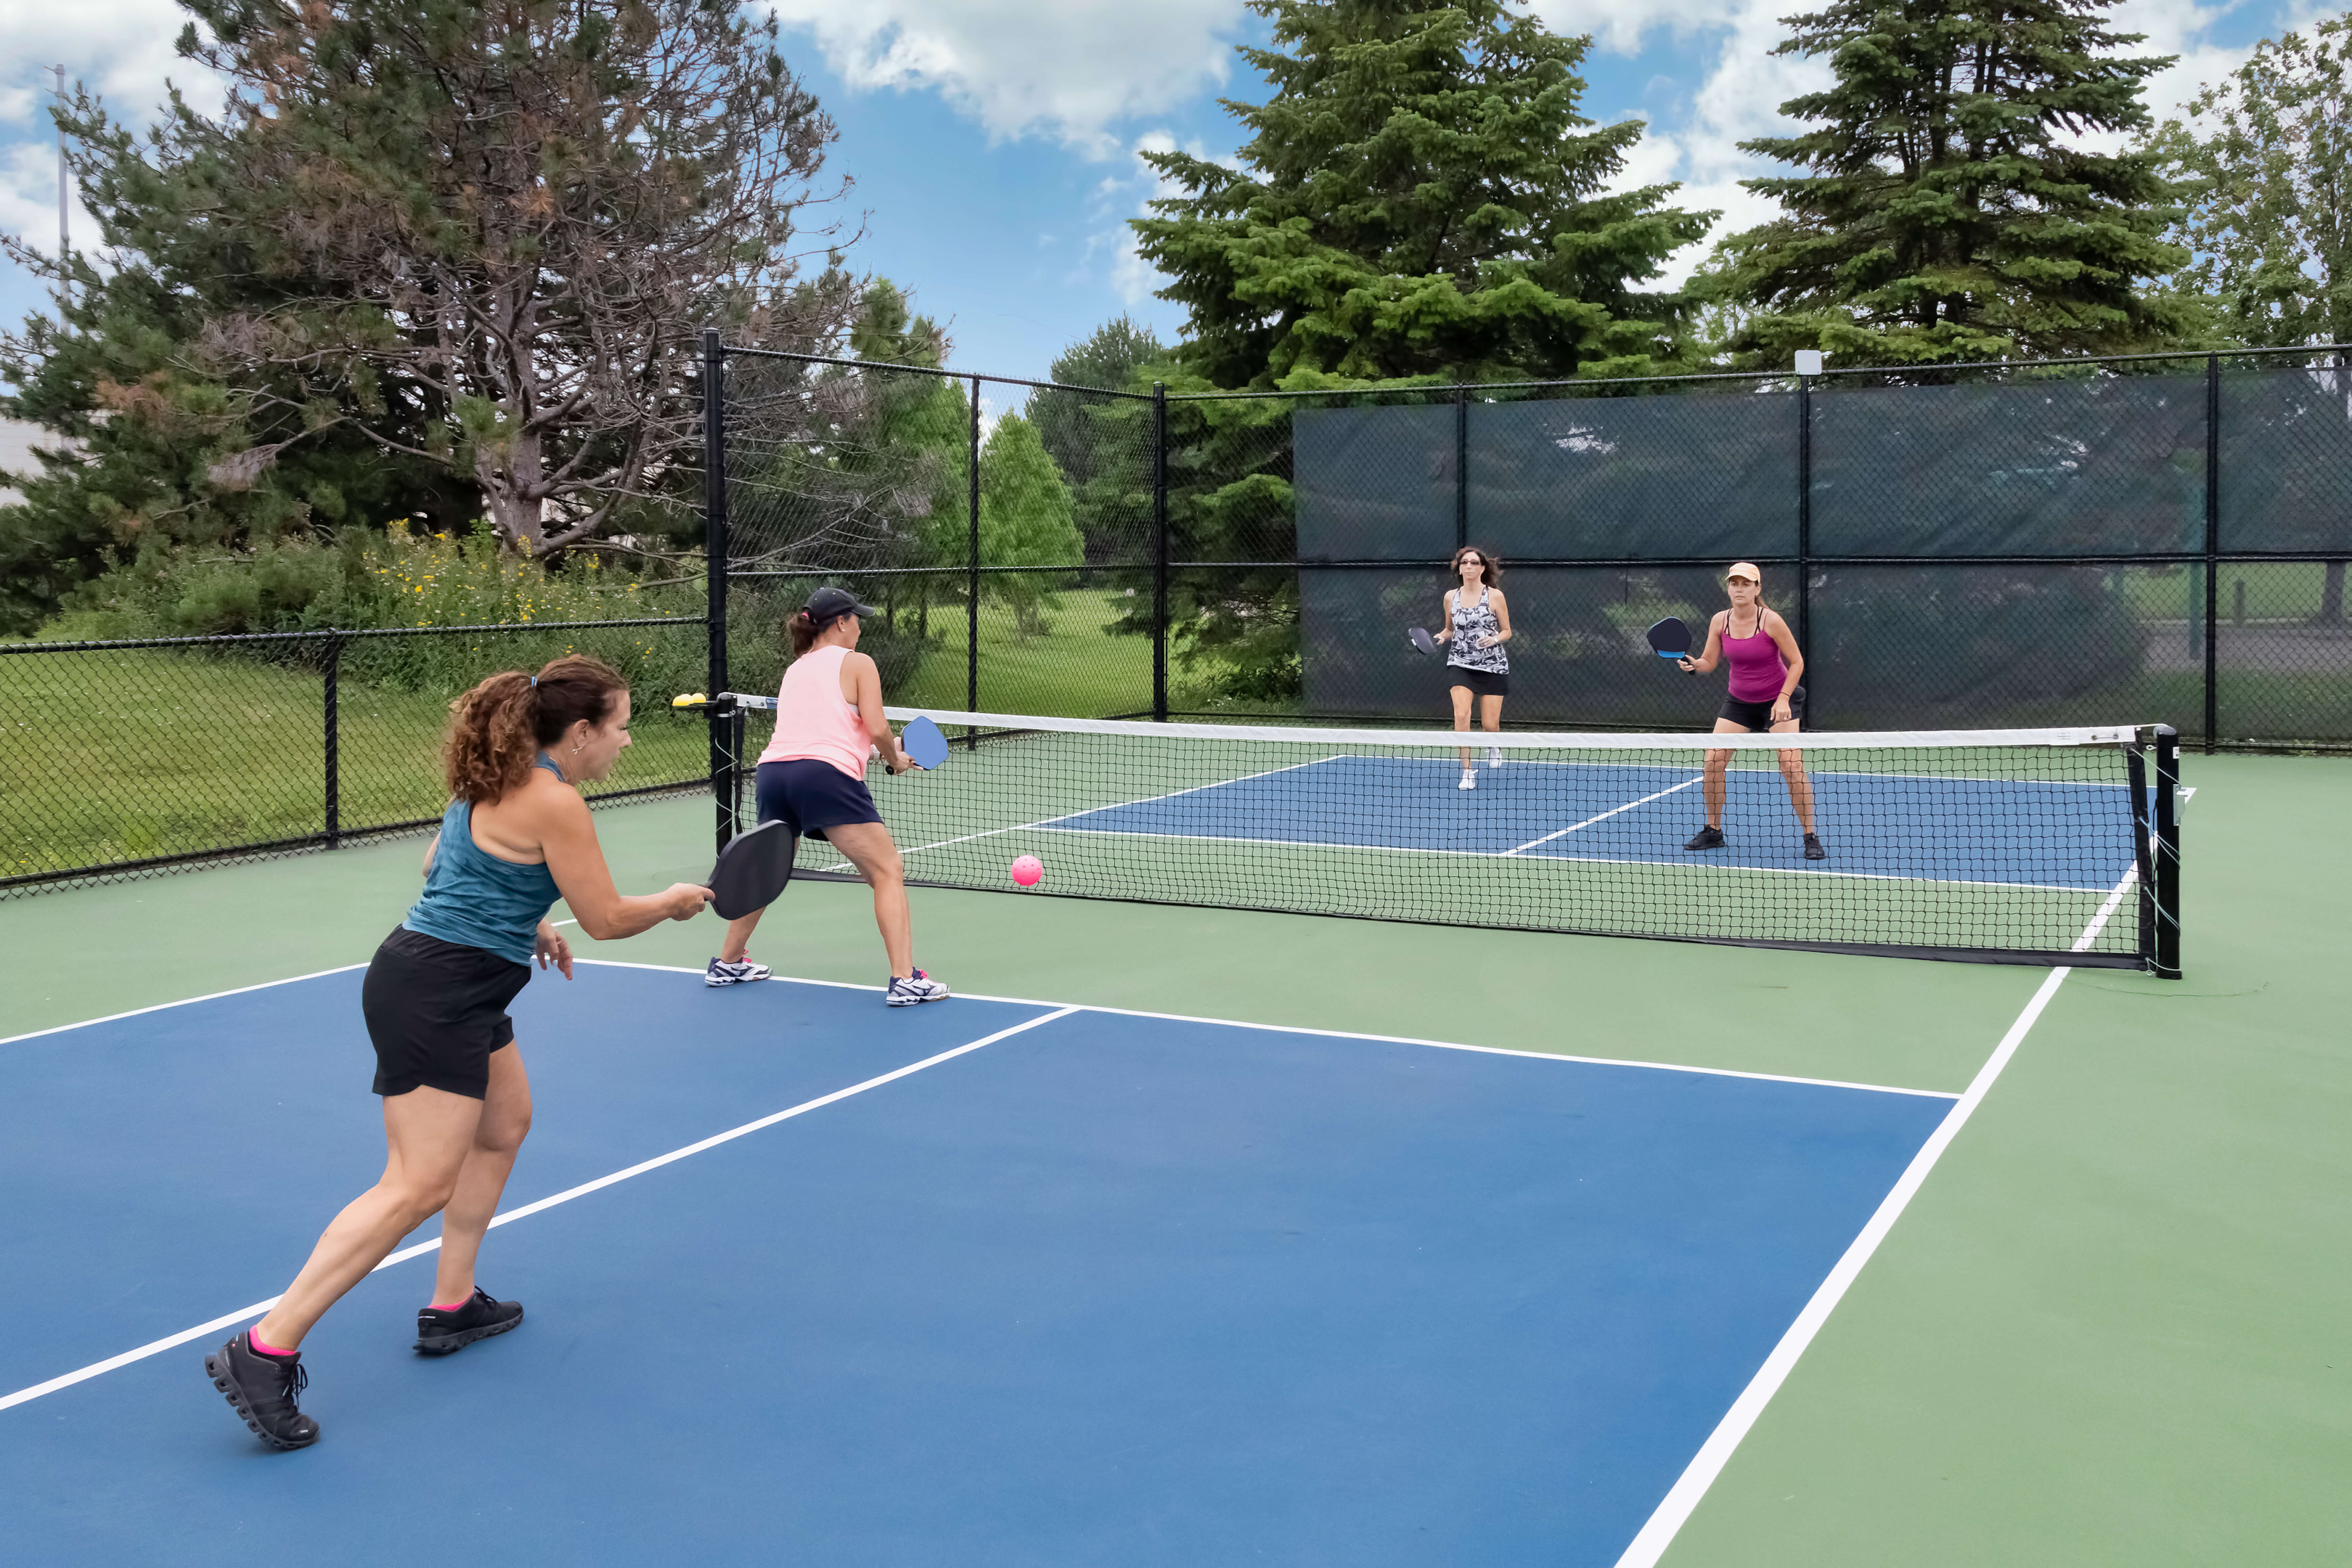 Four diverse women paired into two teams engaging in a pickleball match.